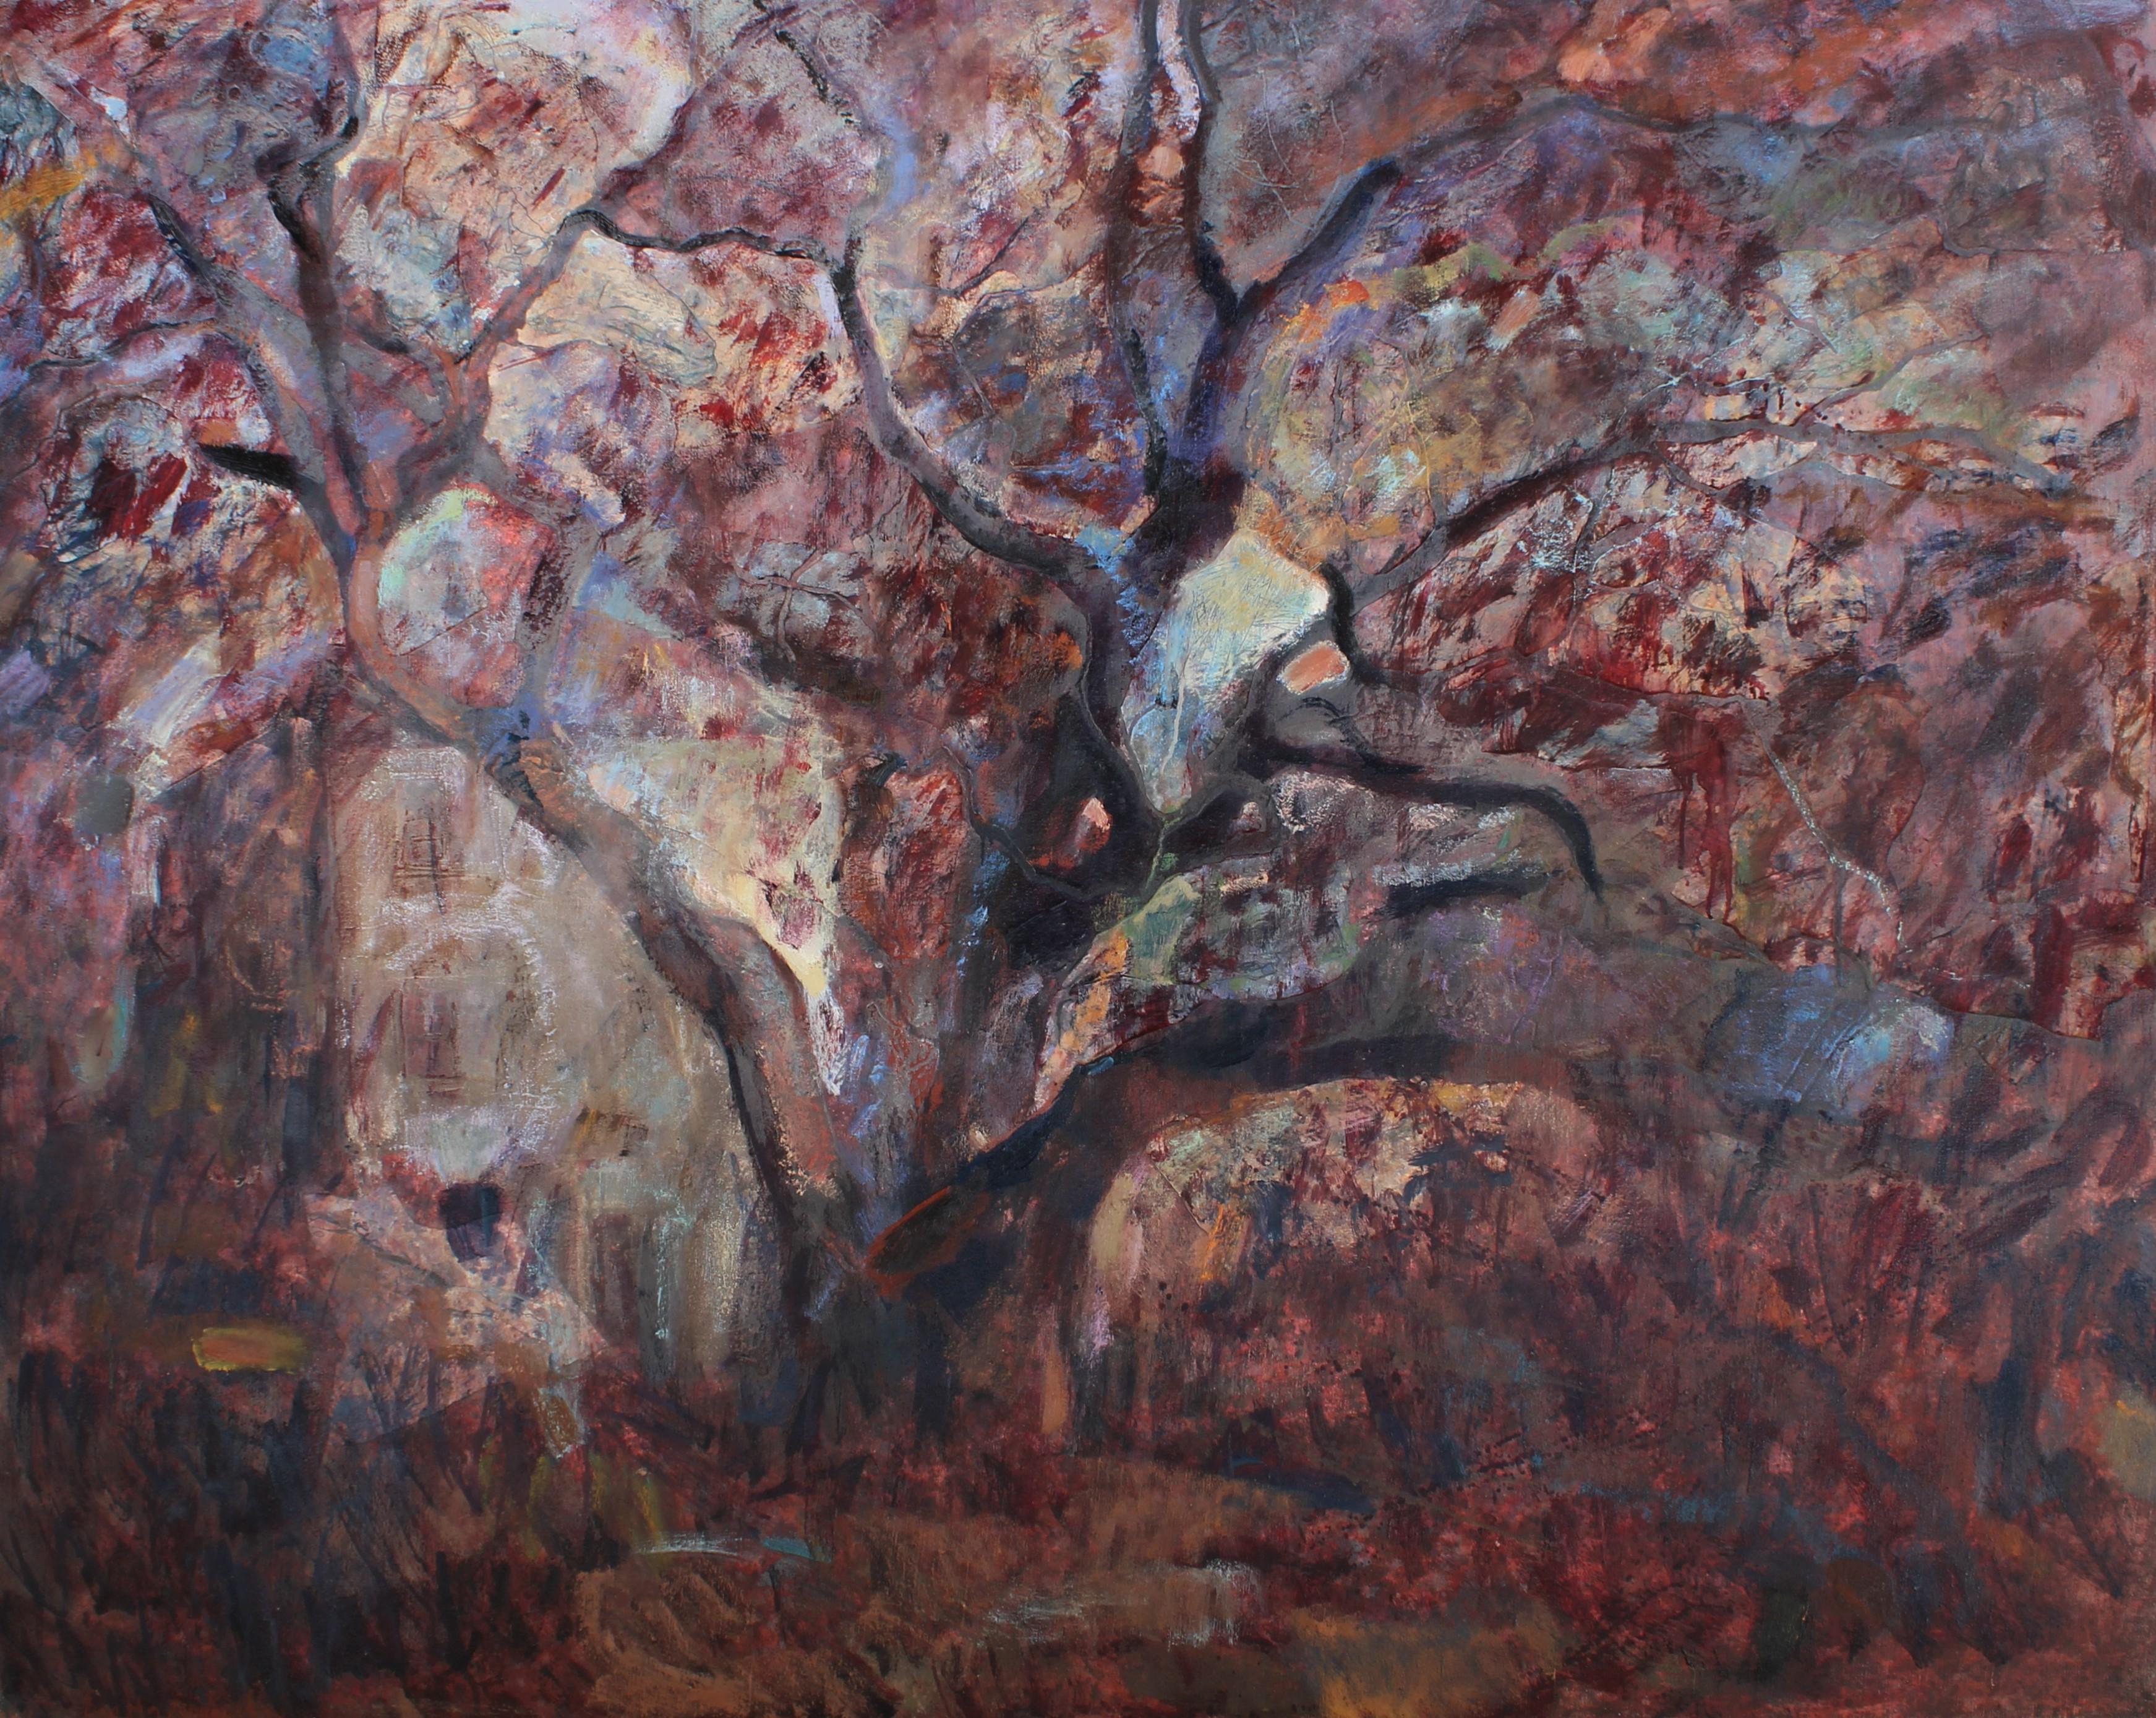 "Wallnut at Rusalsko. Red " is an impressionist landscape painting by Maestro Elena Georgieva.

The painting is unframed.

About the artwork:

TECHNIQUE:  Oil painting
STYLE: Impressionist, Contemporary
Edition : Unique, signed
Weight: Approximately